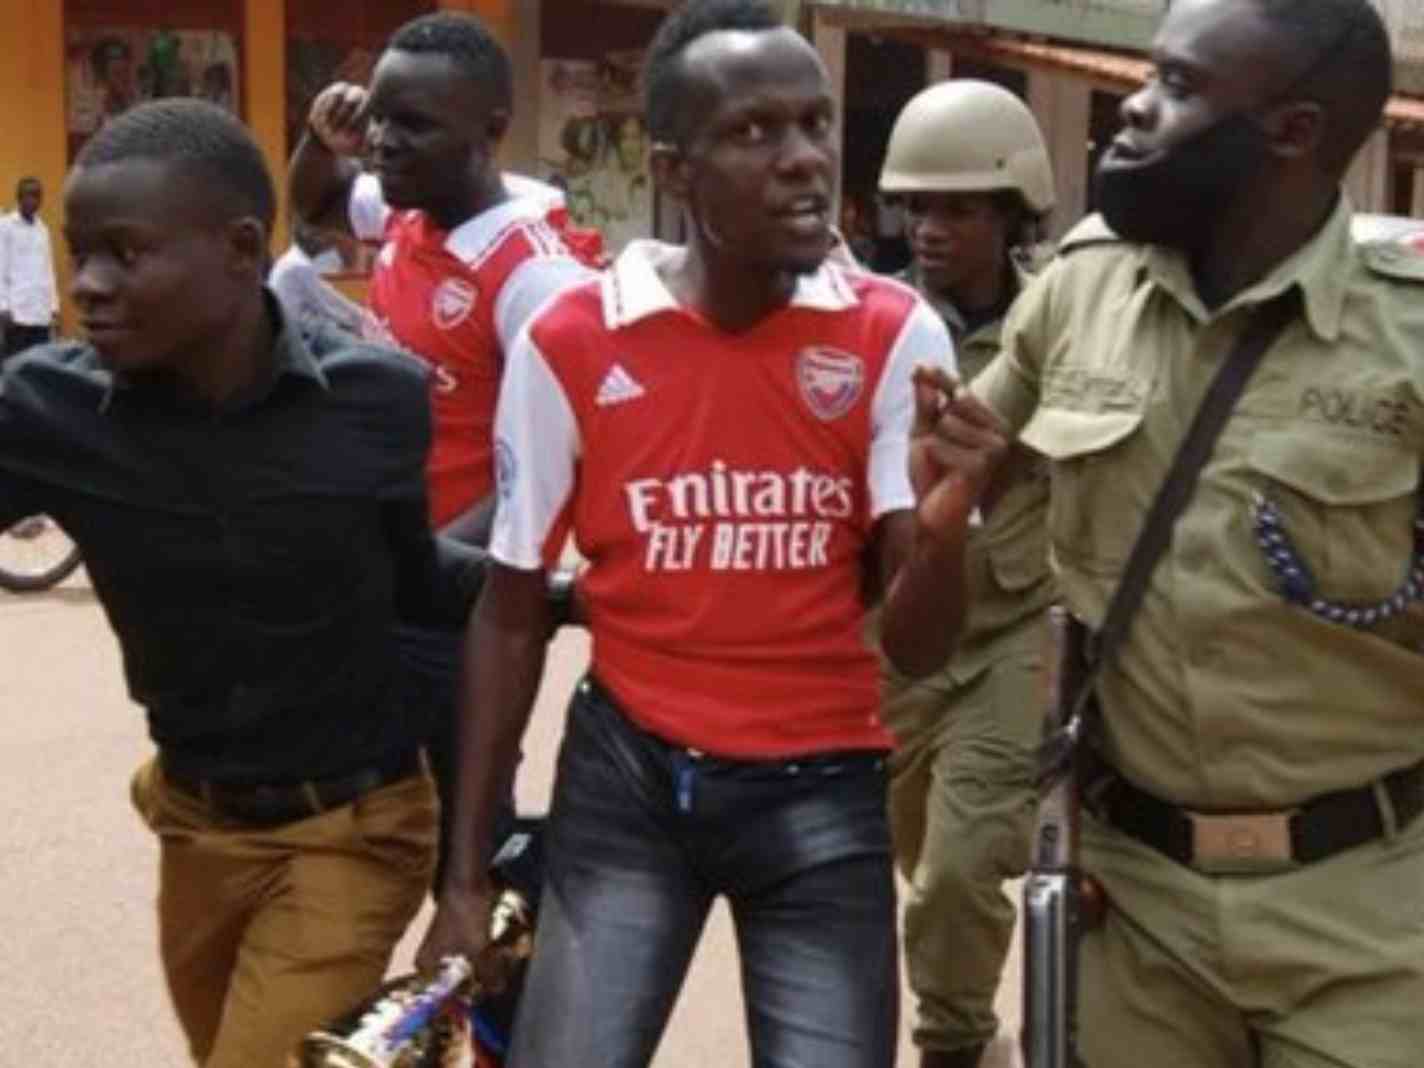 Arsenal Fans Cause Chaos In Uganda But There’s A Catch